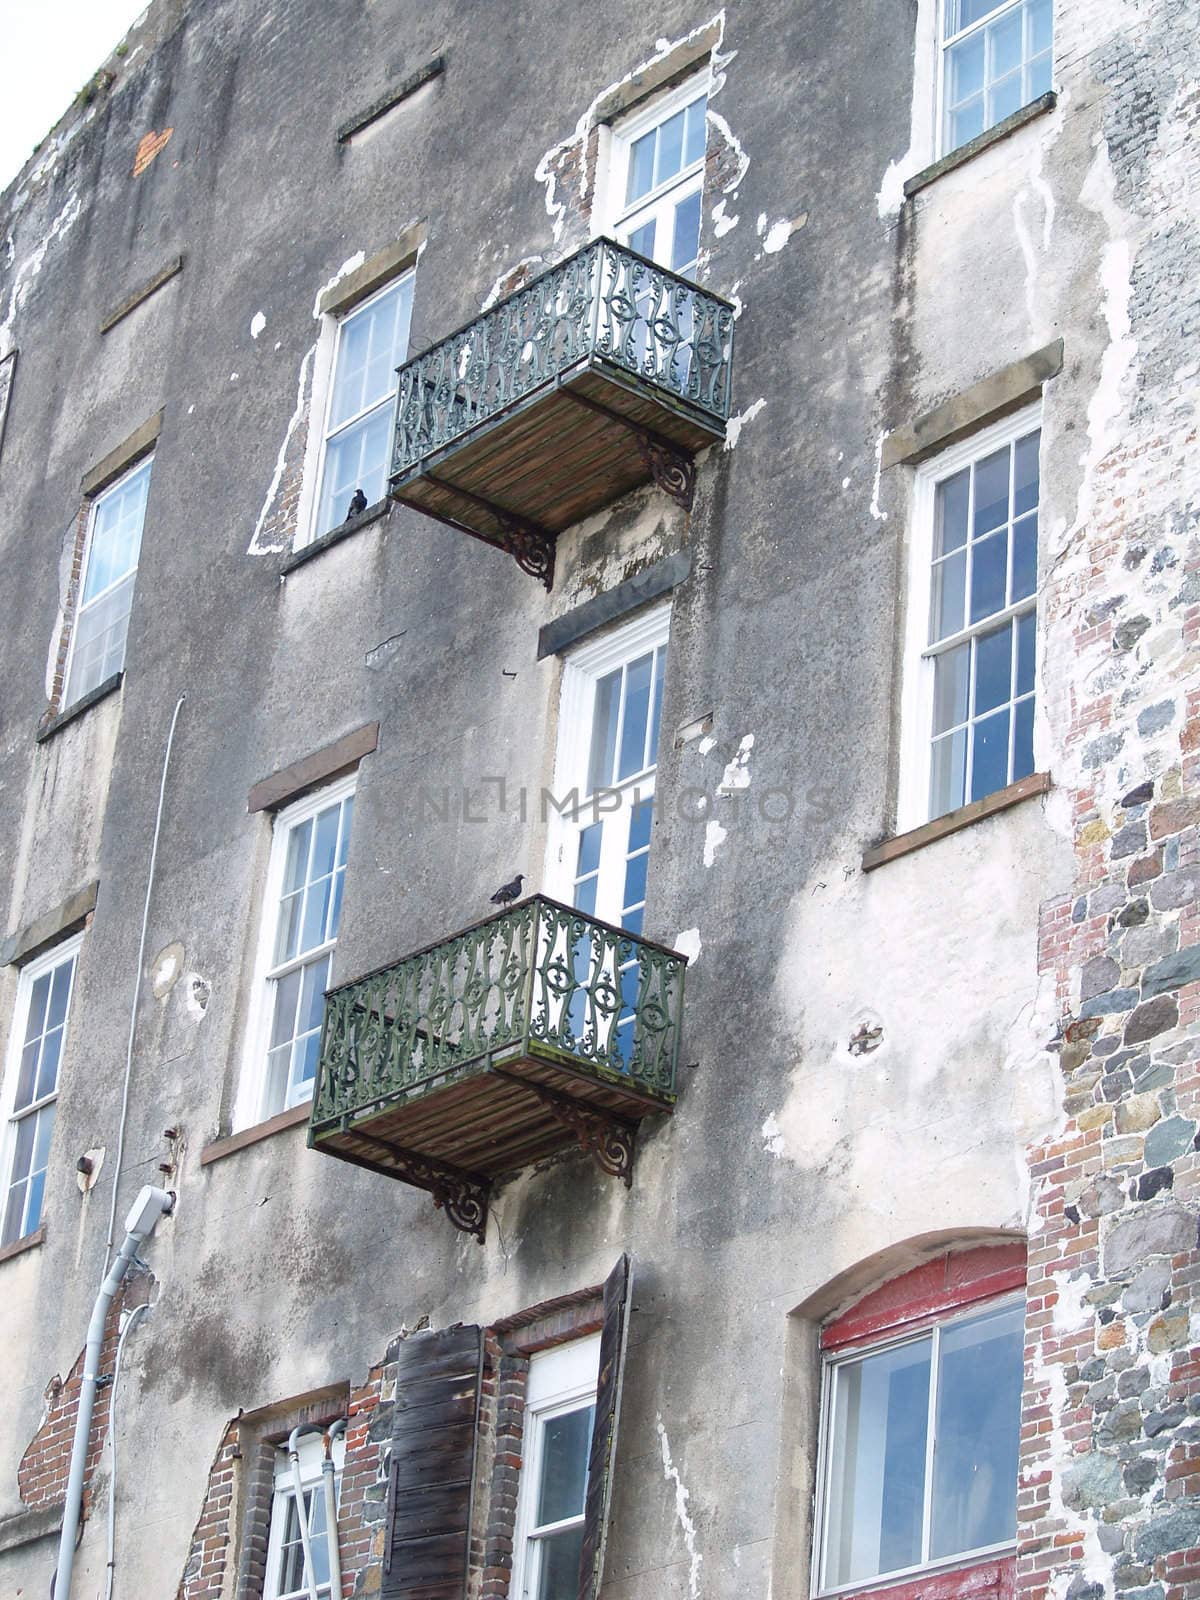 Wrought iron balconies attached to an old waterfront multistory building. The blue sky is reflected in the white wooden windows.